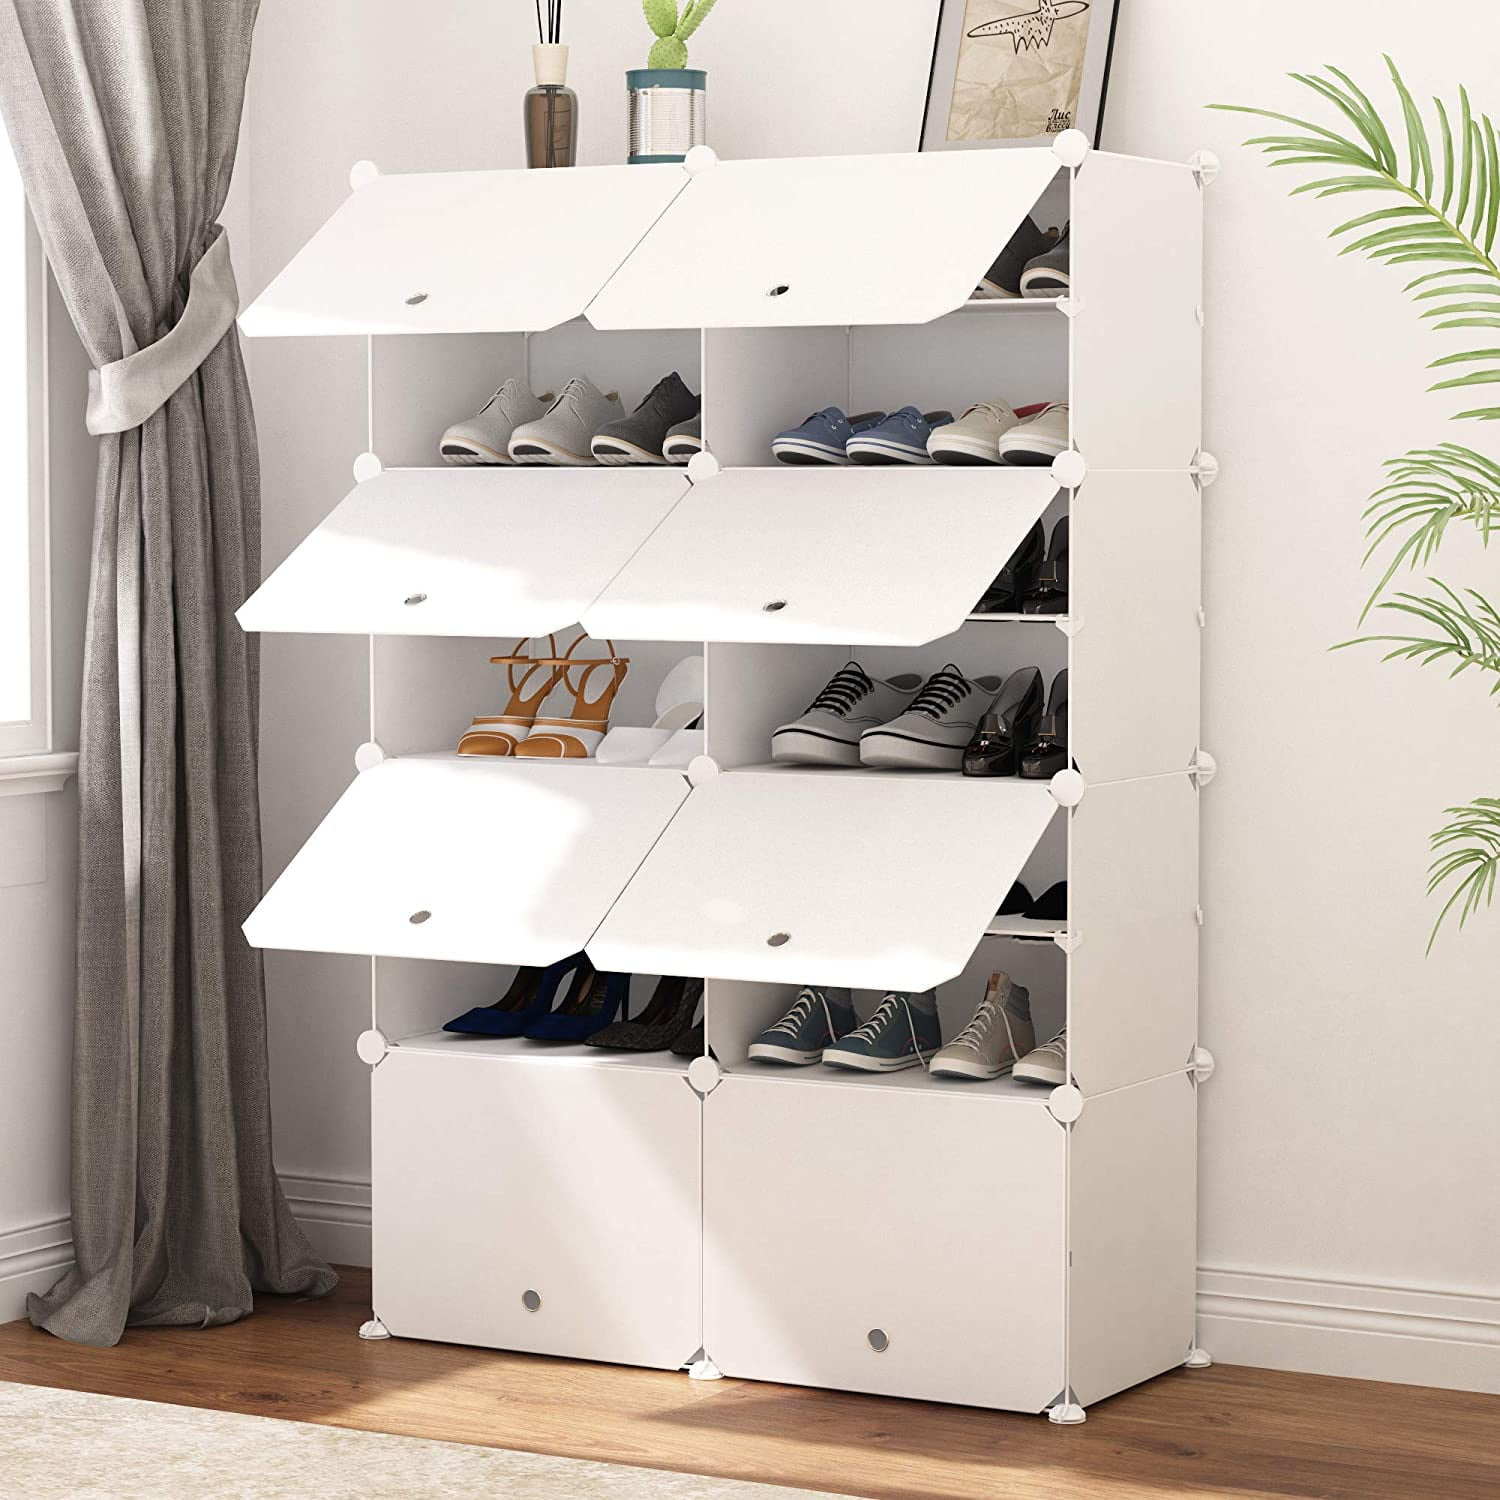 White with transparent doors JOISCOPE PREMAG Portable Shoe Storage Organizer Tower boots Slippers 3 * 7-tier Modular Cabinet Shelving for Space Saving Shoe Rack Shelves for shoes 